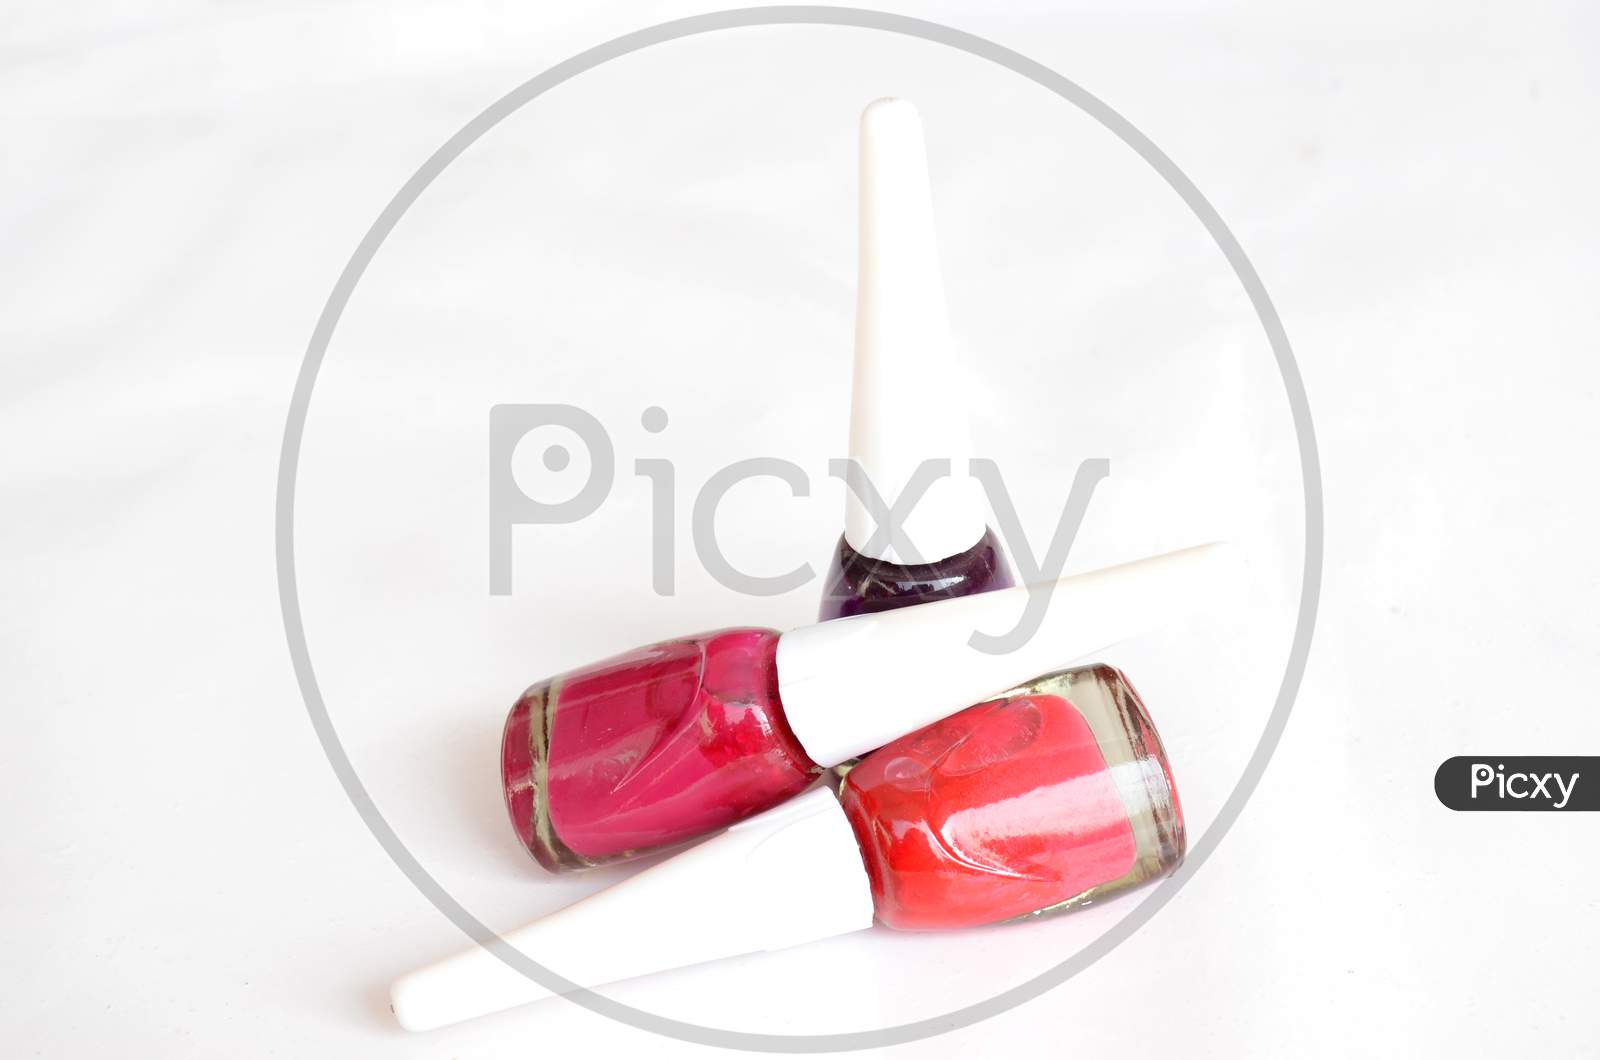 The Colorful Nail Police Glass With Plastic Bottle Isolated On White Background.